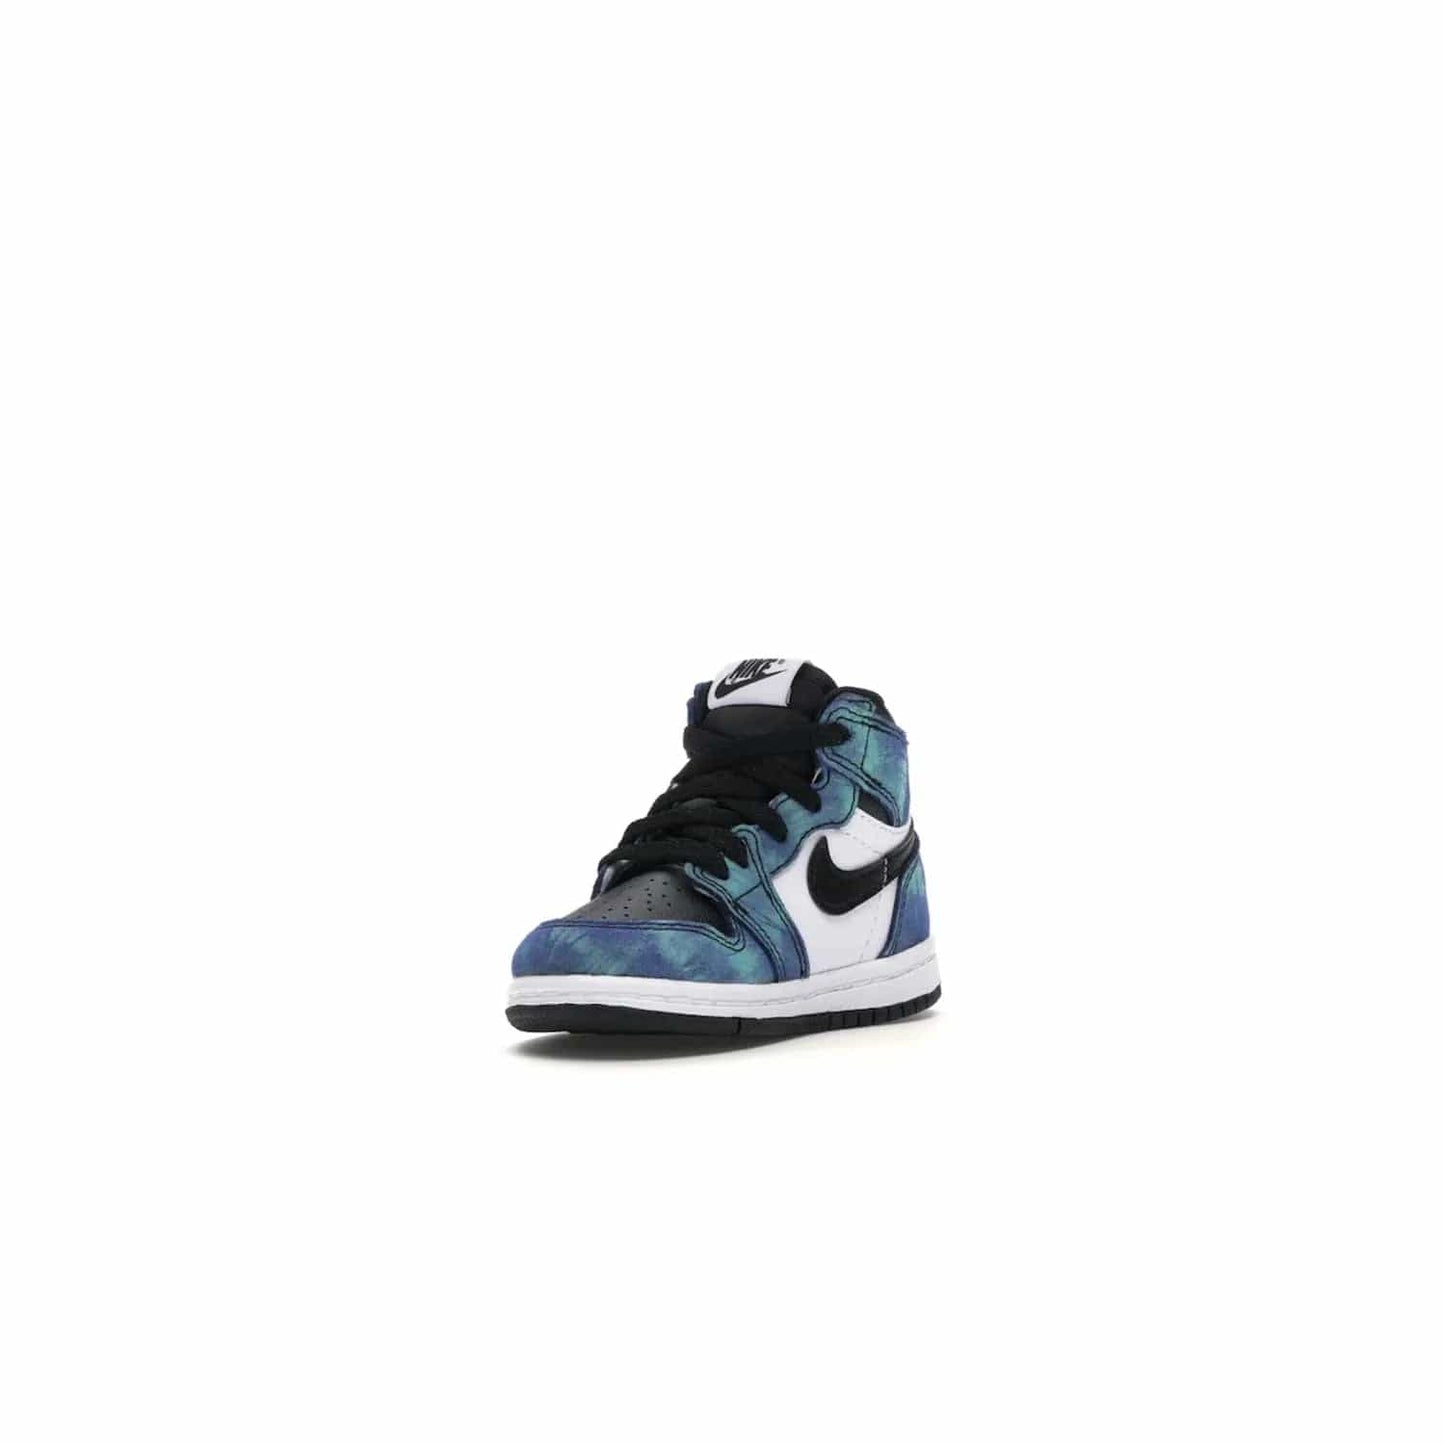 Jordan 1 Retro High Tie Dye (TD) - Image 14 - Only at www.BallersClubKickz.com - Add a unique twist to your sneaker collection with the Jordan 1 Retro High Tie Dye (TD). Classic Air Jordan 1 details like toe box perforations and the signature Swoosh logo on the sidewall are topped with an eye-catching tie dye design that’s perfect for styling all year round.